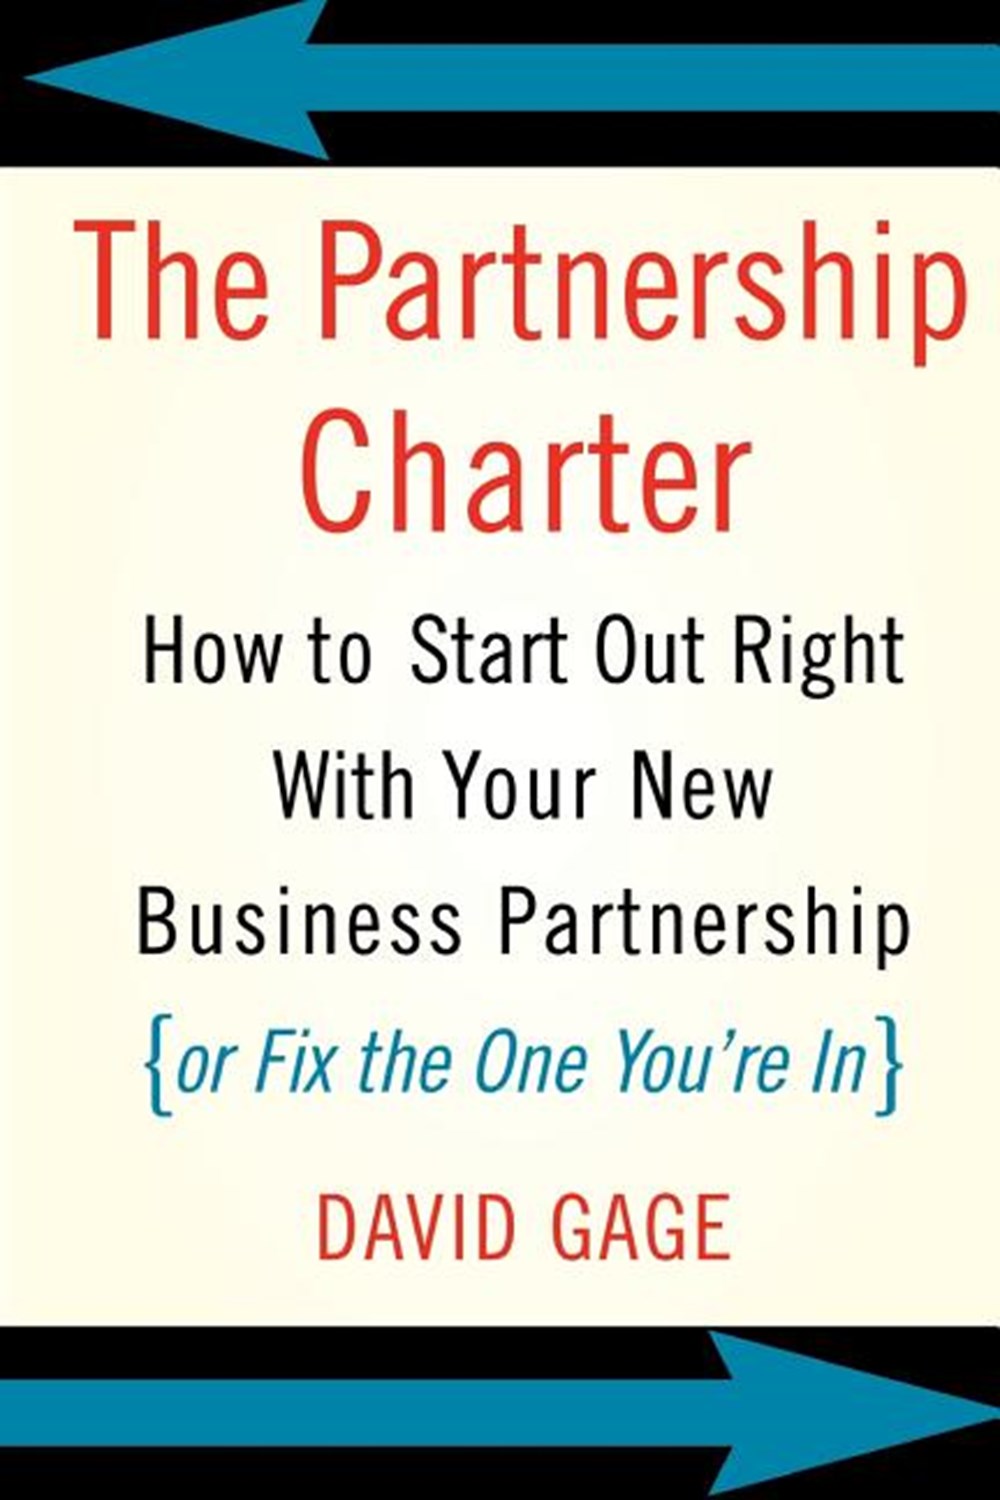 Partnership Charter How to Start Out Right with Your New Business Partnership (or Fix the One You're